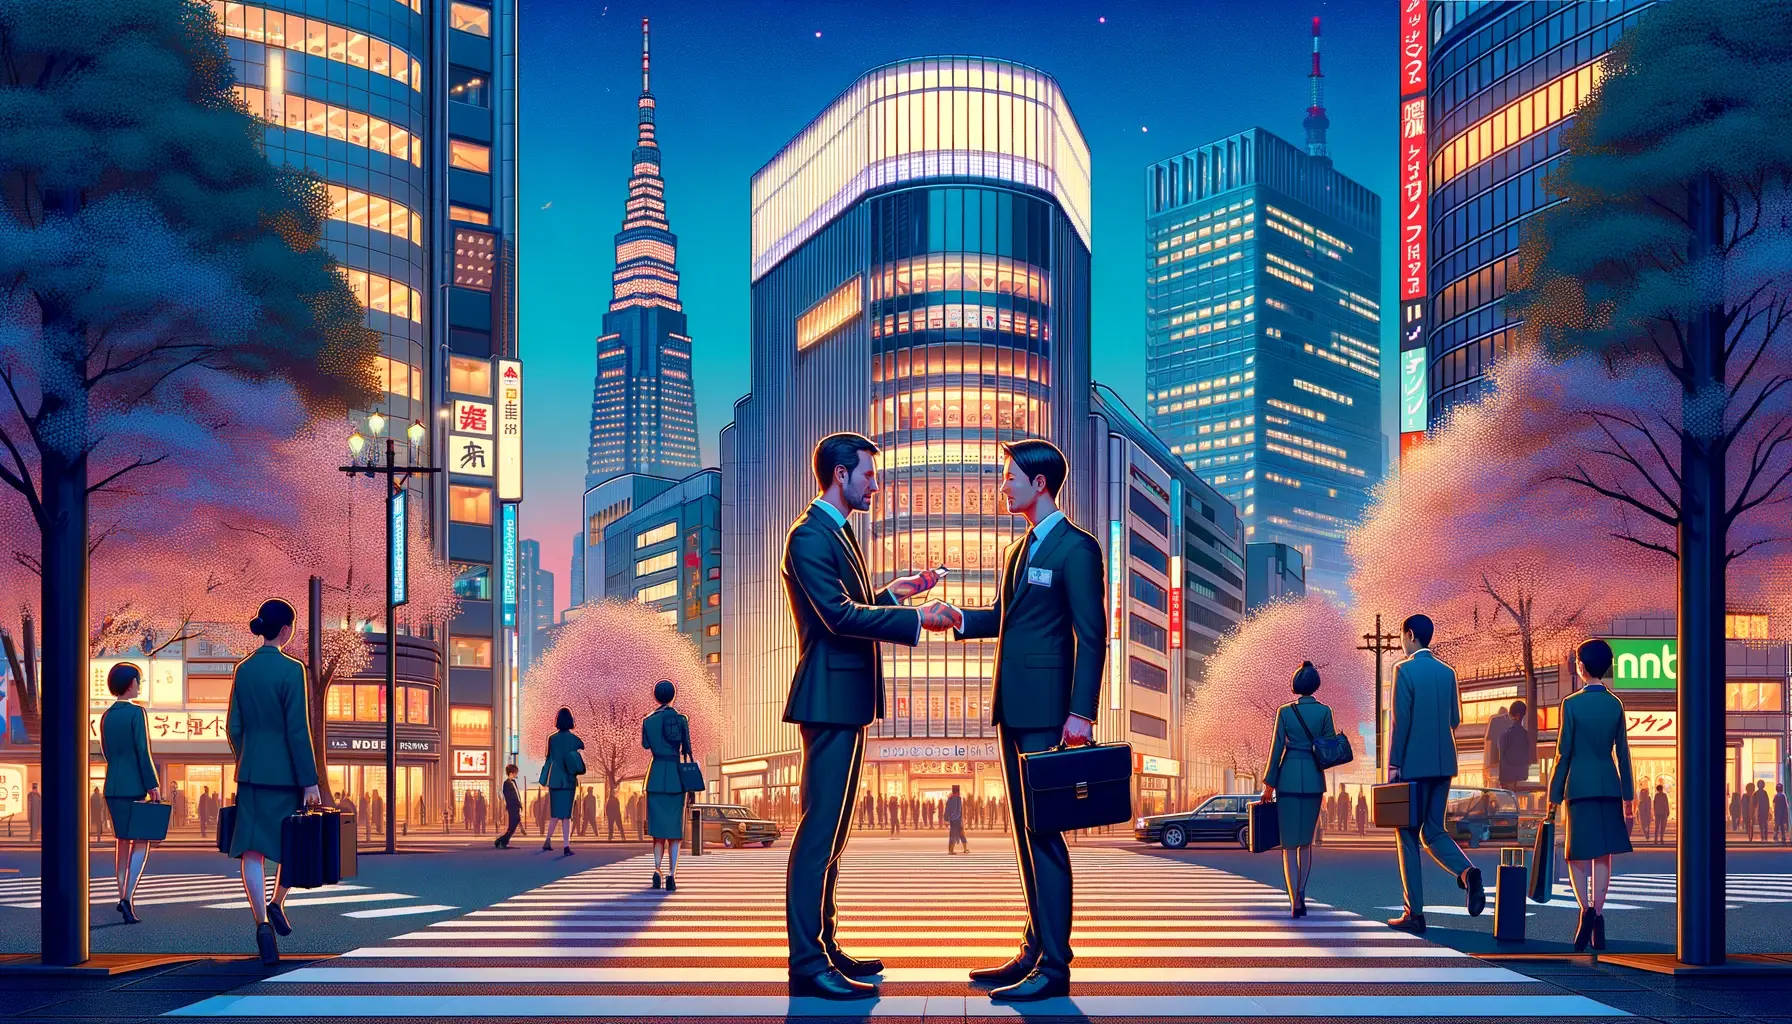 Two businessmen shaking hands on a busy city street at dusk, surrounded by illuminated skyscrapers and cherry blossom trees, with signs in Japanese and a starry sky above.